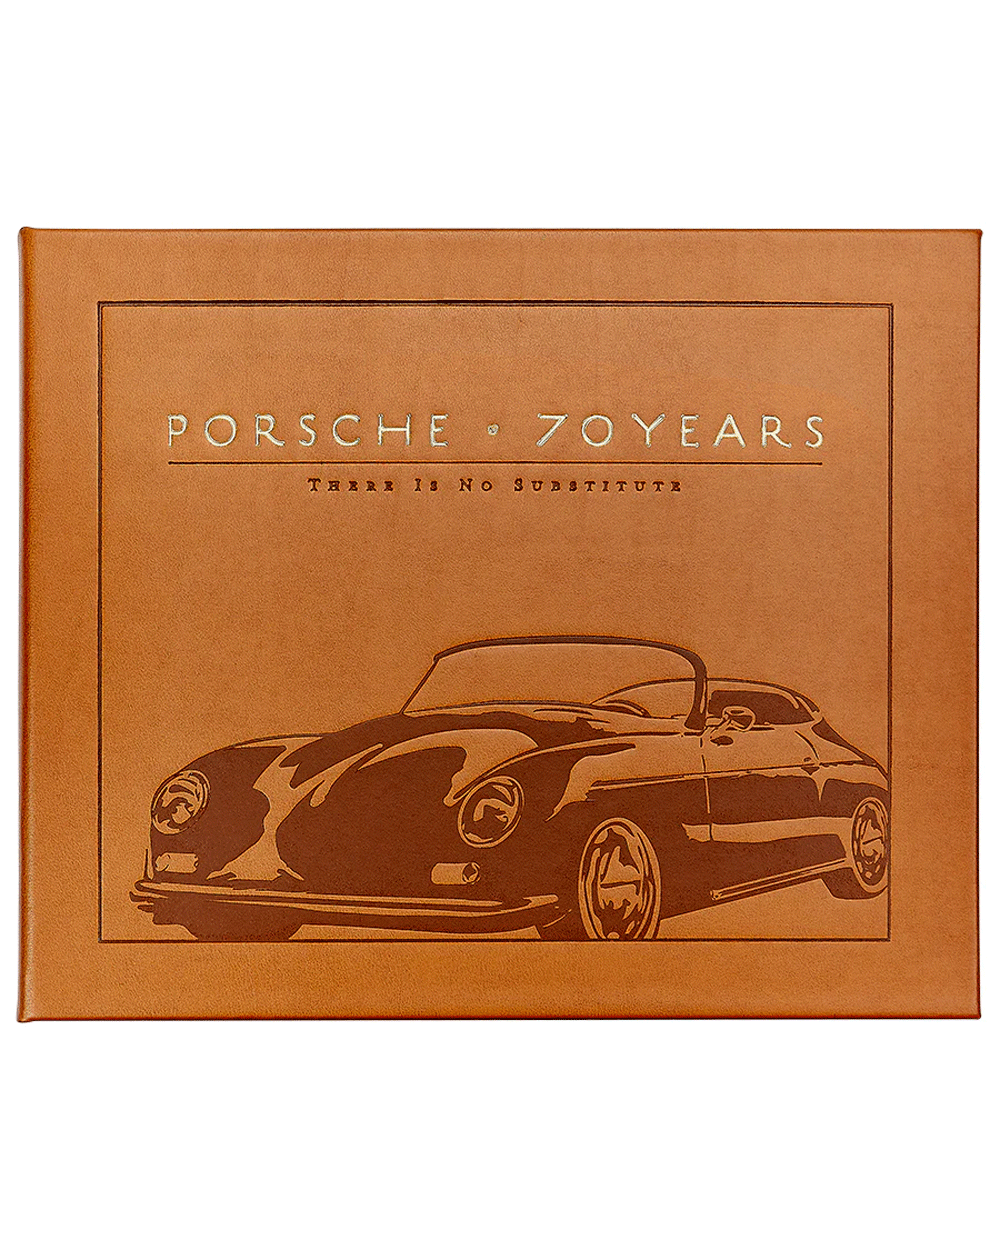 Porsche 70 Years: There Is No Substitute Book